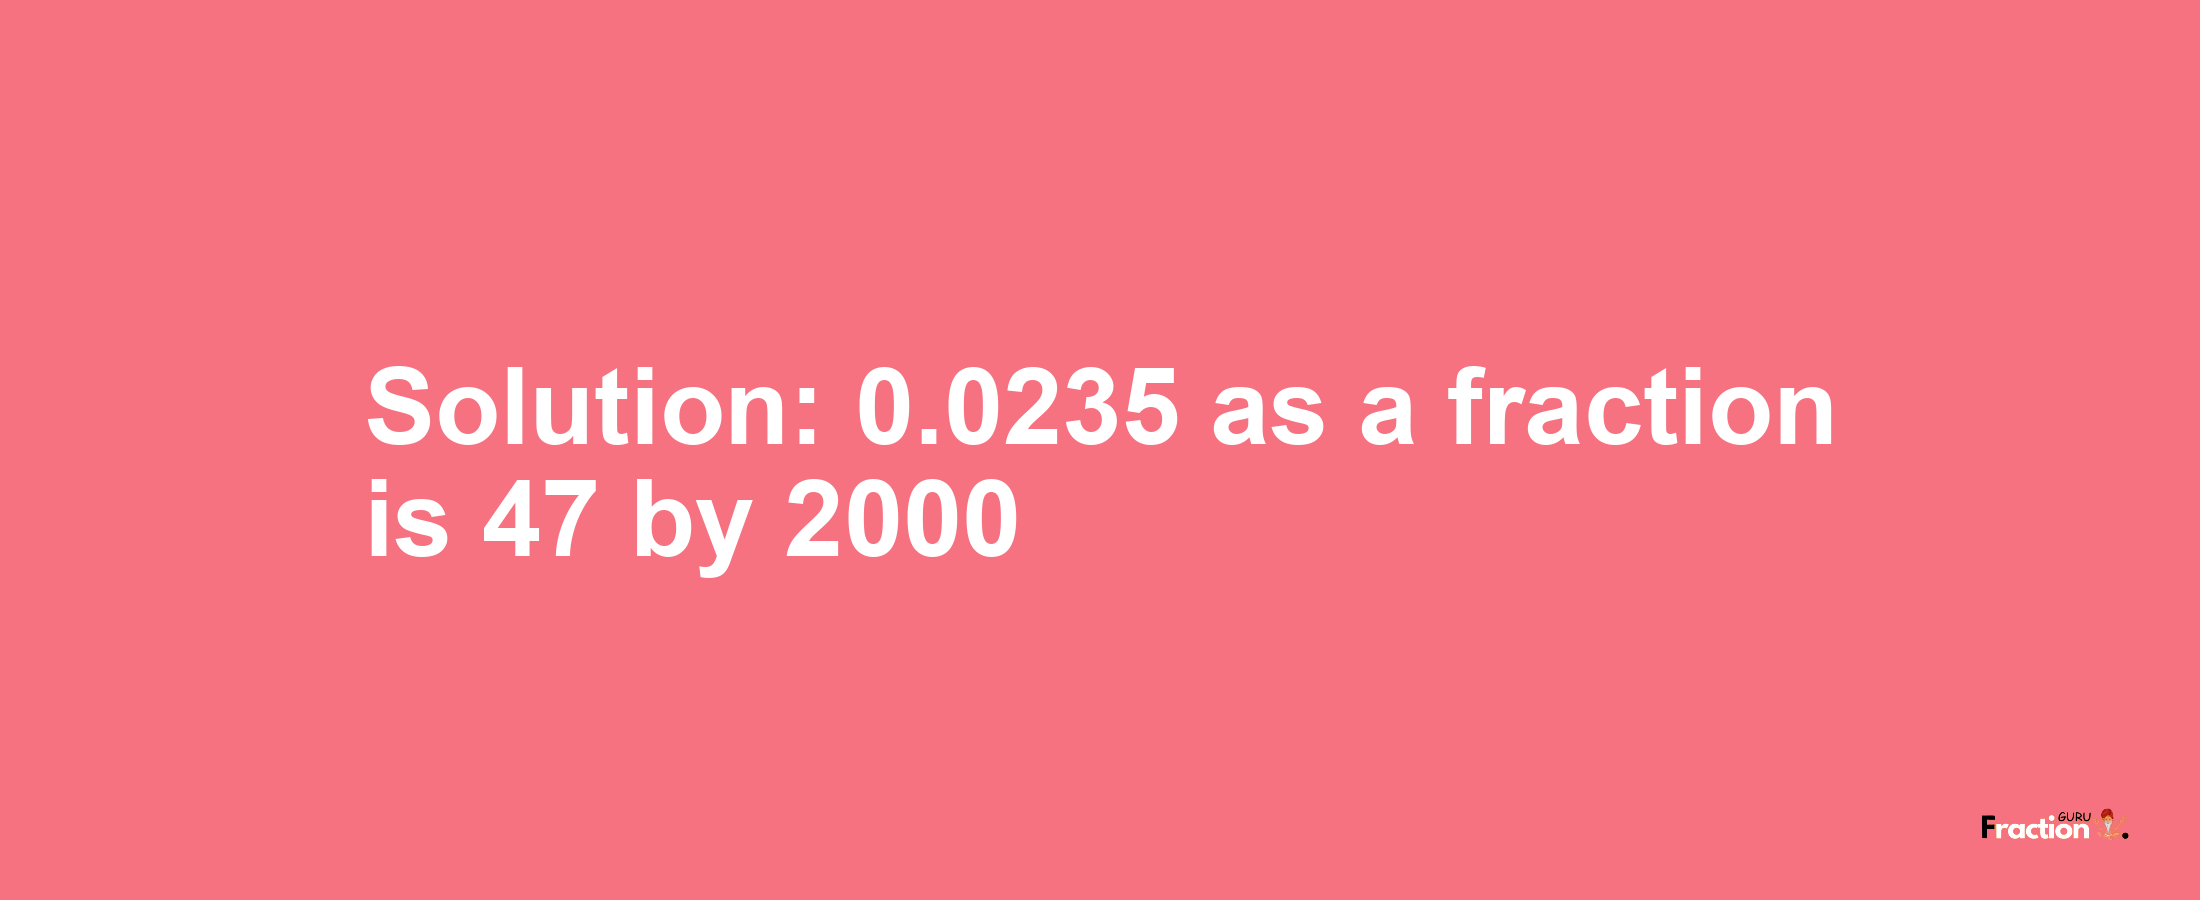 Solution:0.0235 as a fraction is 47/2000